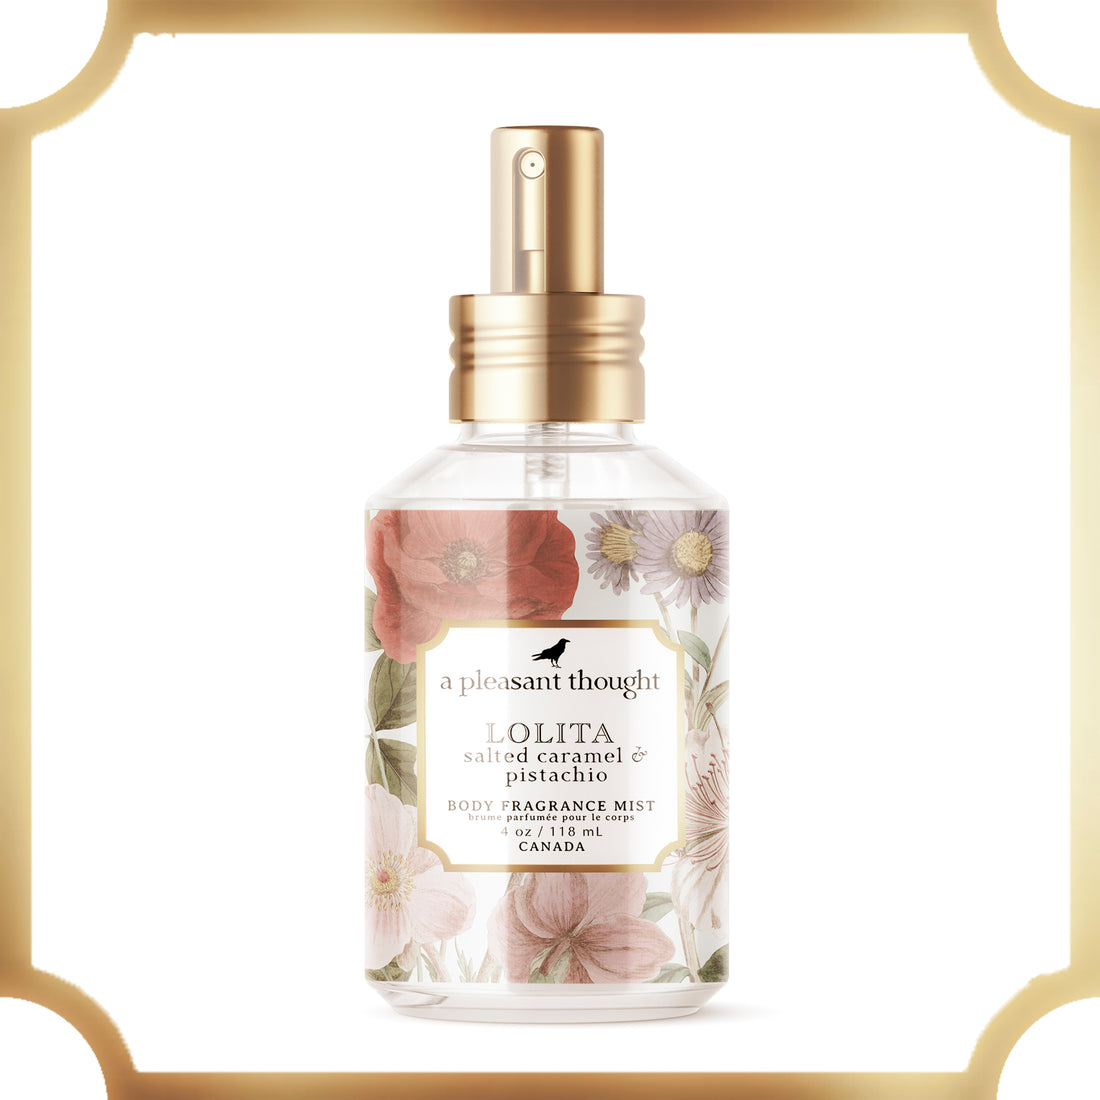  body fragrance mist collection a pleasant thought